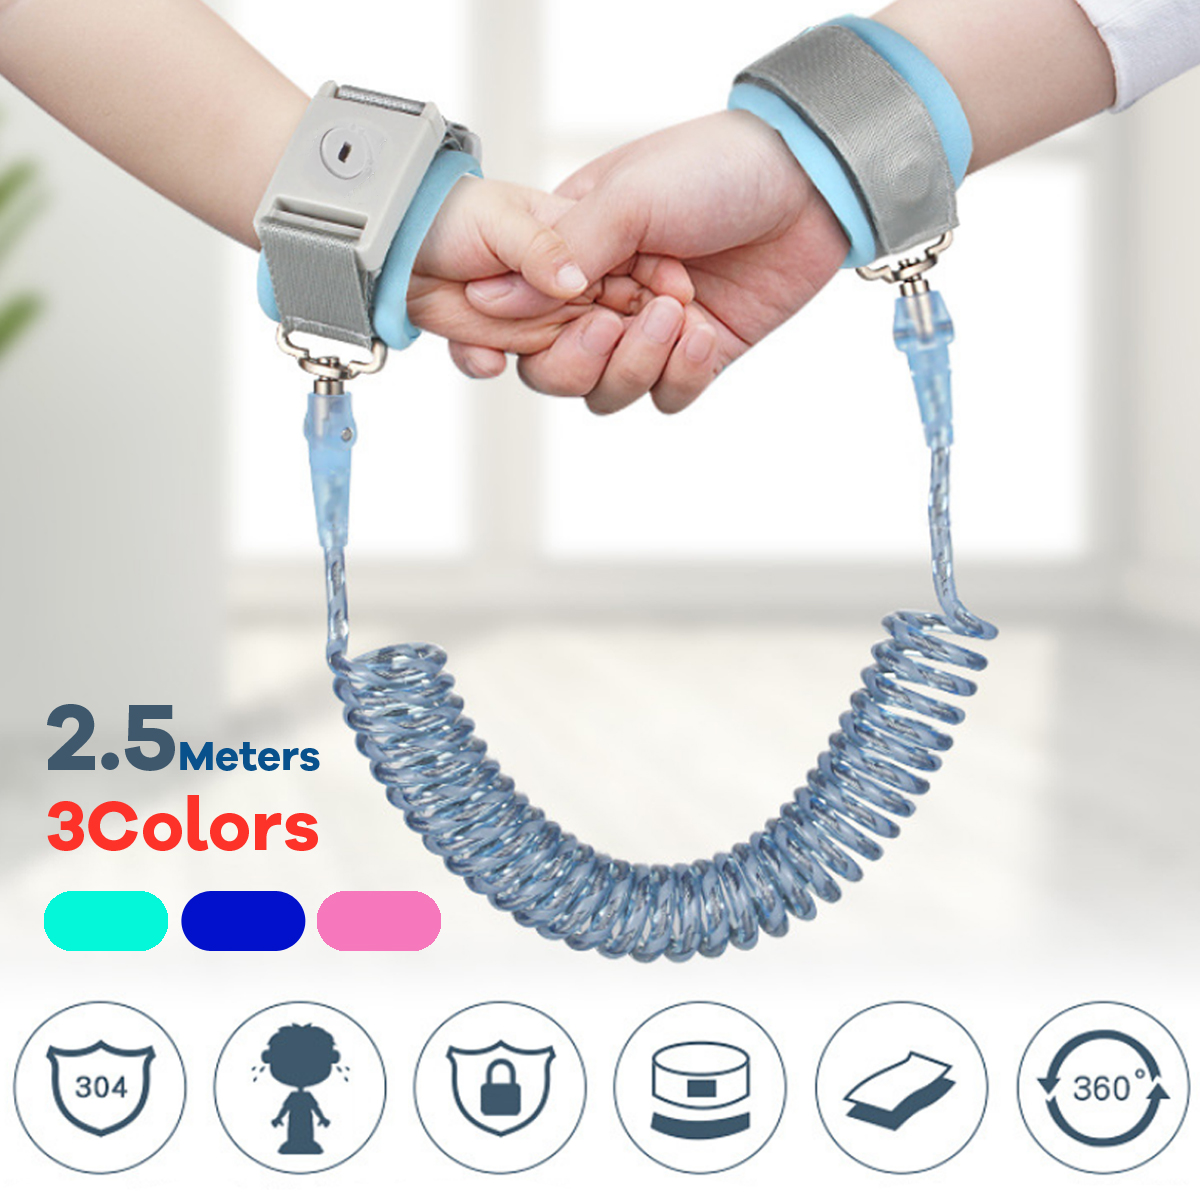 25m-Children-Anti-Lost-Wrist-Link-Safety-Harness-Adjustable-Traction-Rope-Toddler-Kids-Baby-Wristban-1815553-1